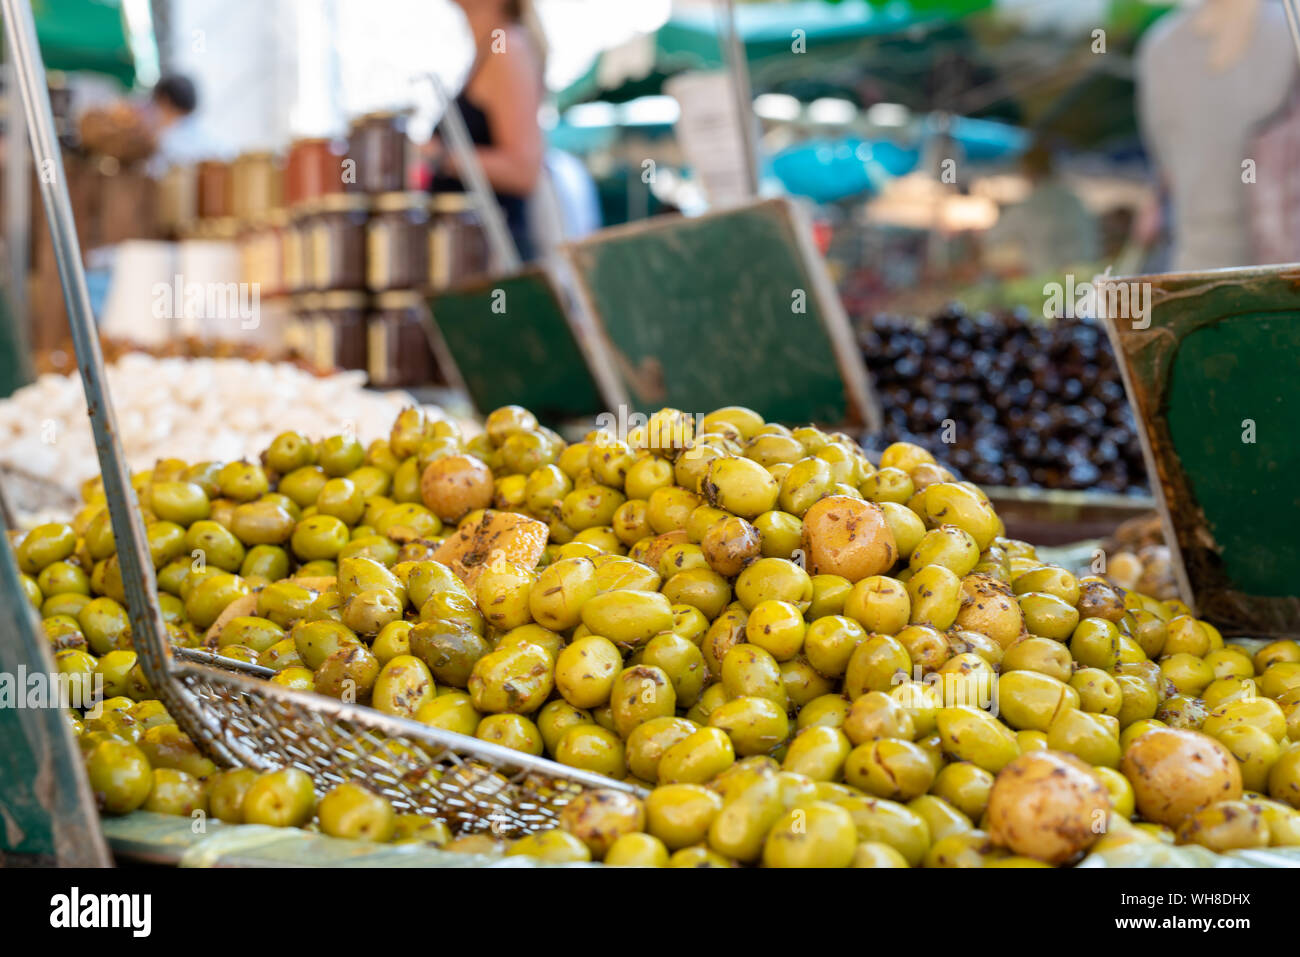 Olives, regional products, street market in Aix-en-Provence, France Stock Photo